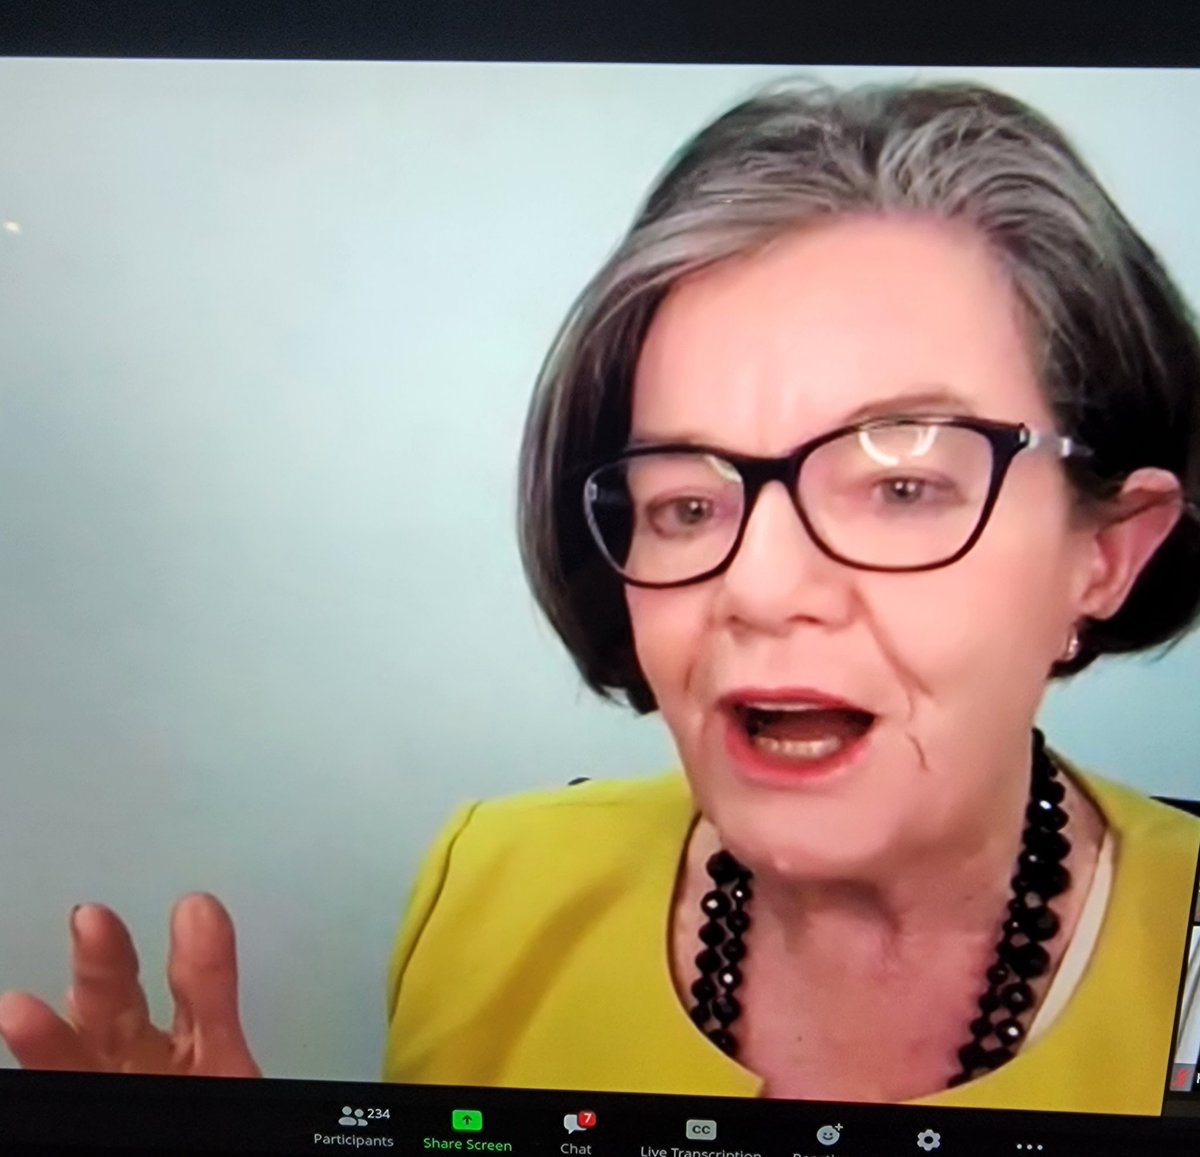 @Indigocathy with @tinajacksonoz and @ji11b giving an excellent opening address to the #CommunityIndependentsProject online conferencewhich is on this weekend. An election like no other!
#AusVotes2022
#IndependentsCan
#AusPol
#WomenInPolitics